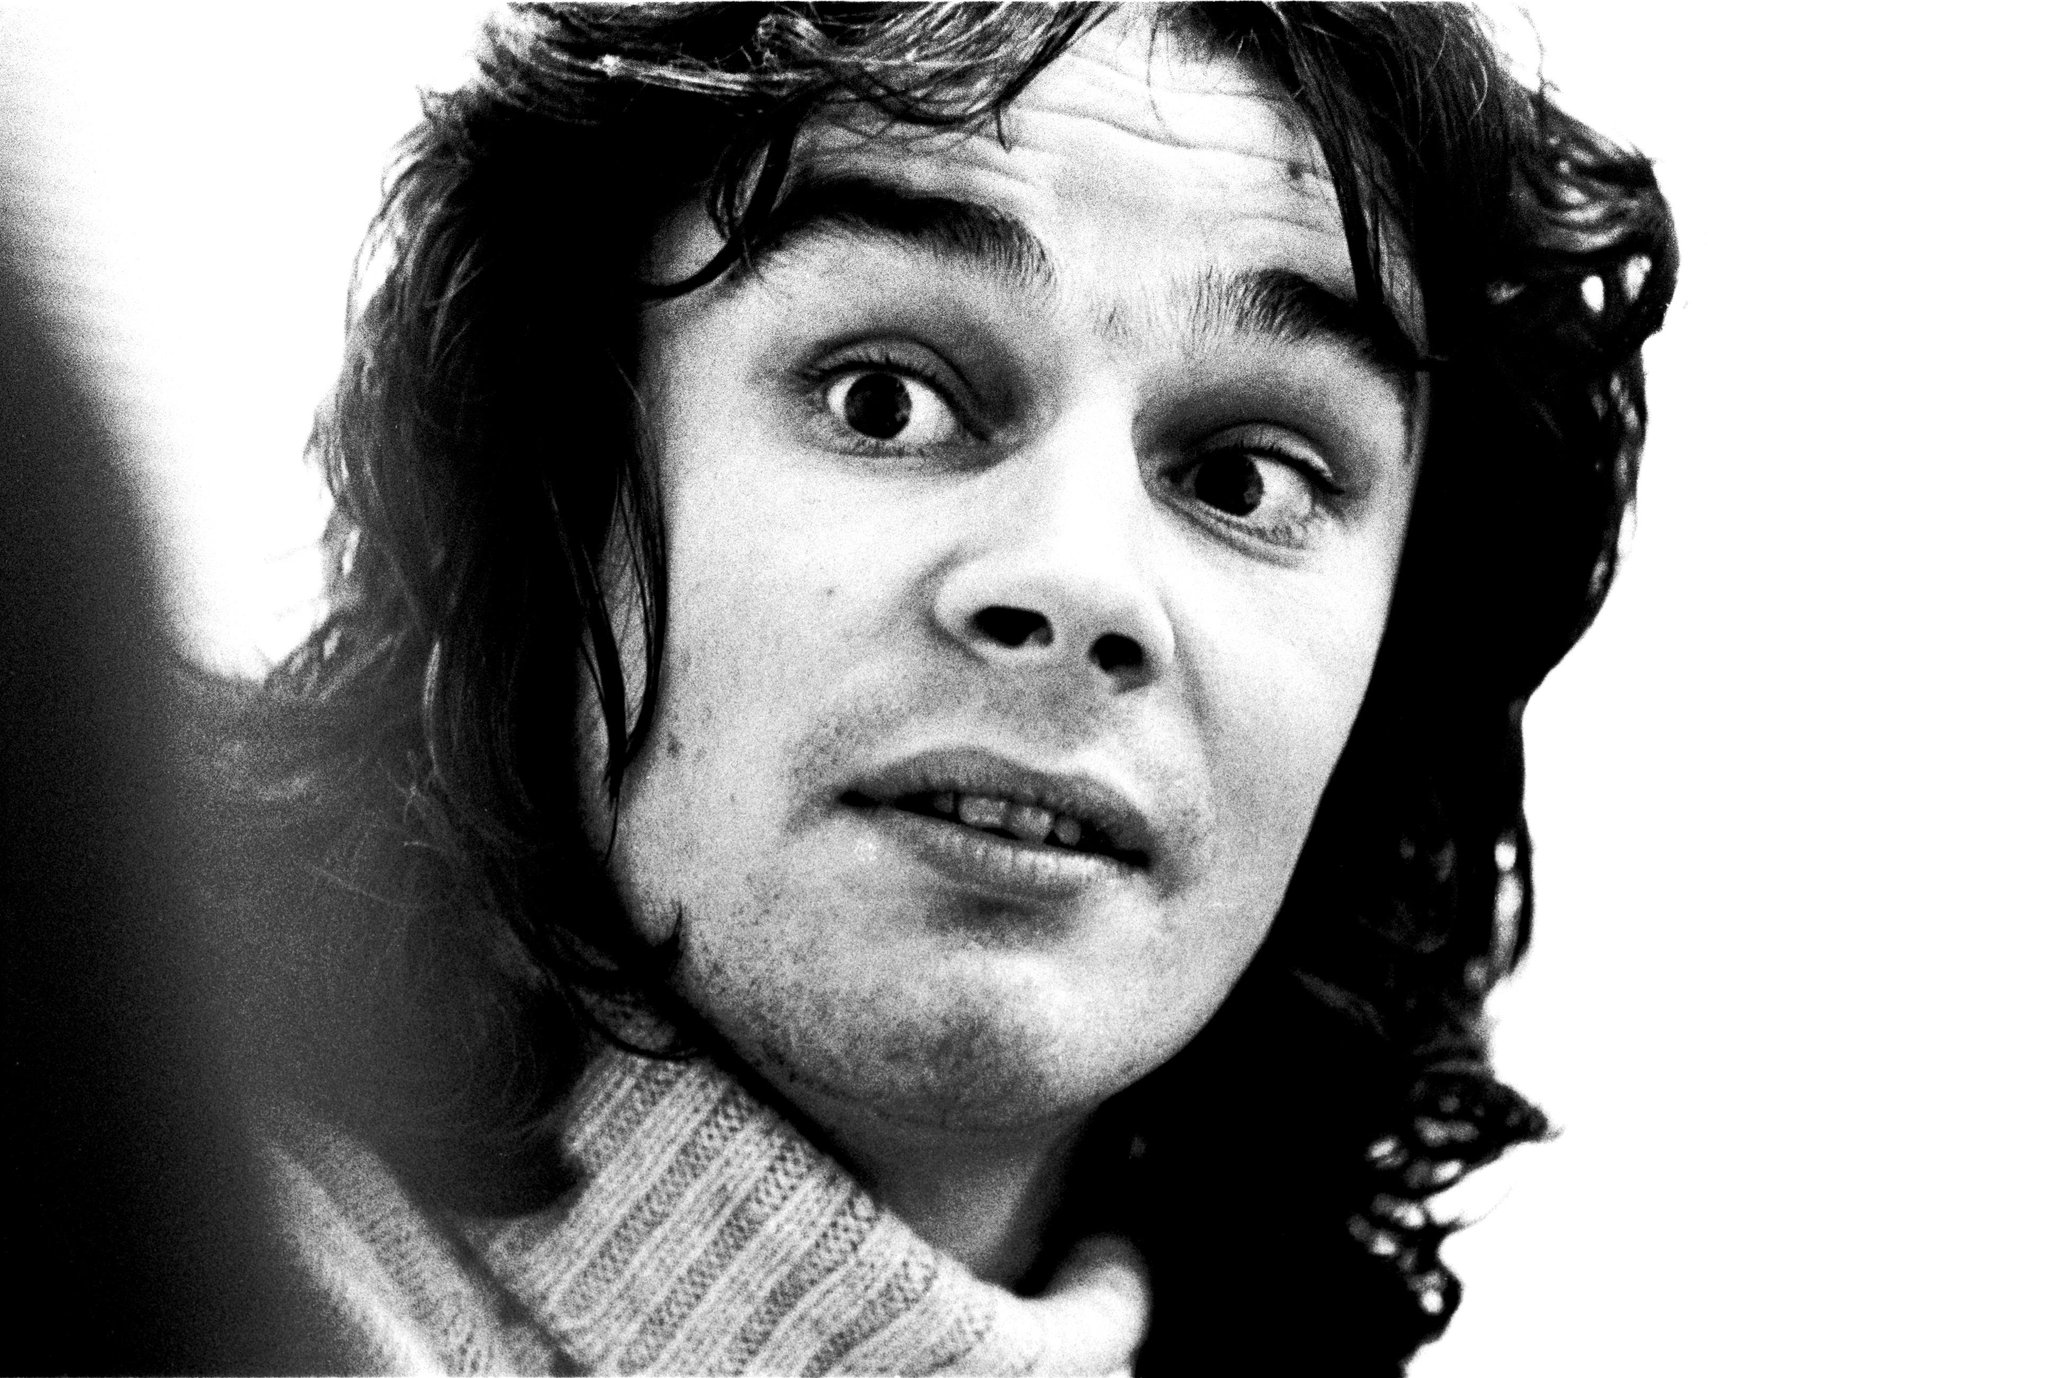 Happy 78th birthday to the great Colin Blunstone - from Hertfordshire. Favourite Blunstone work? 